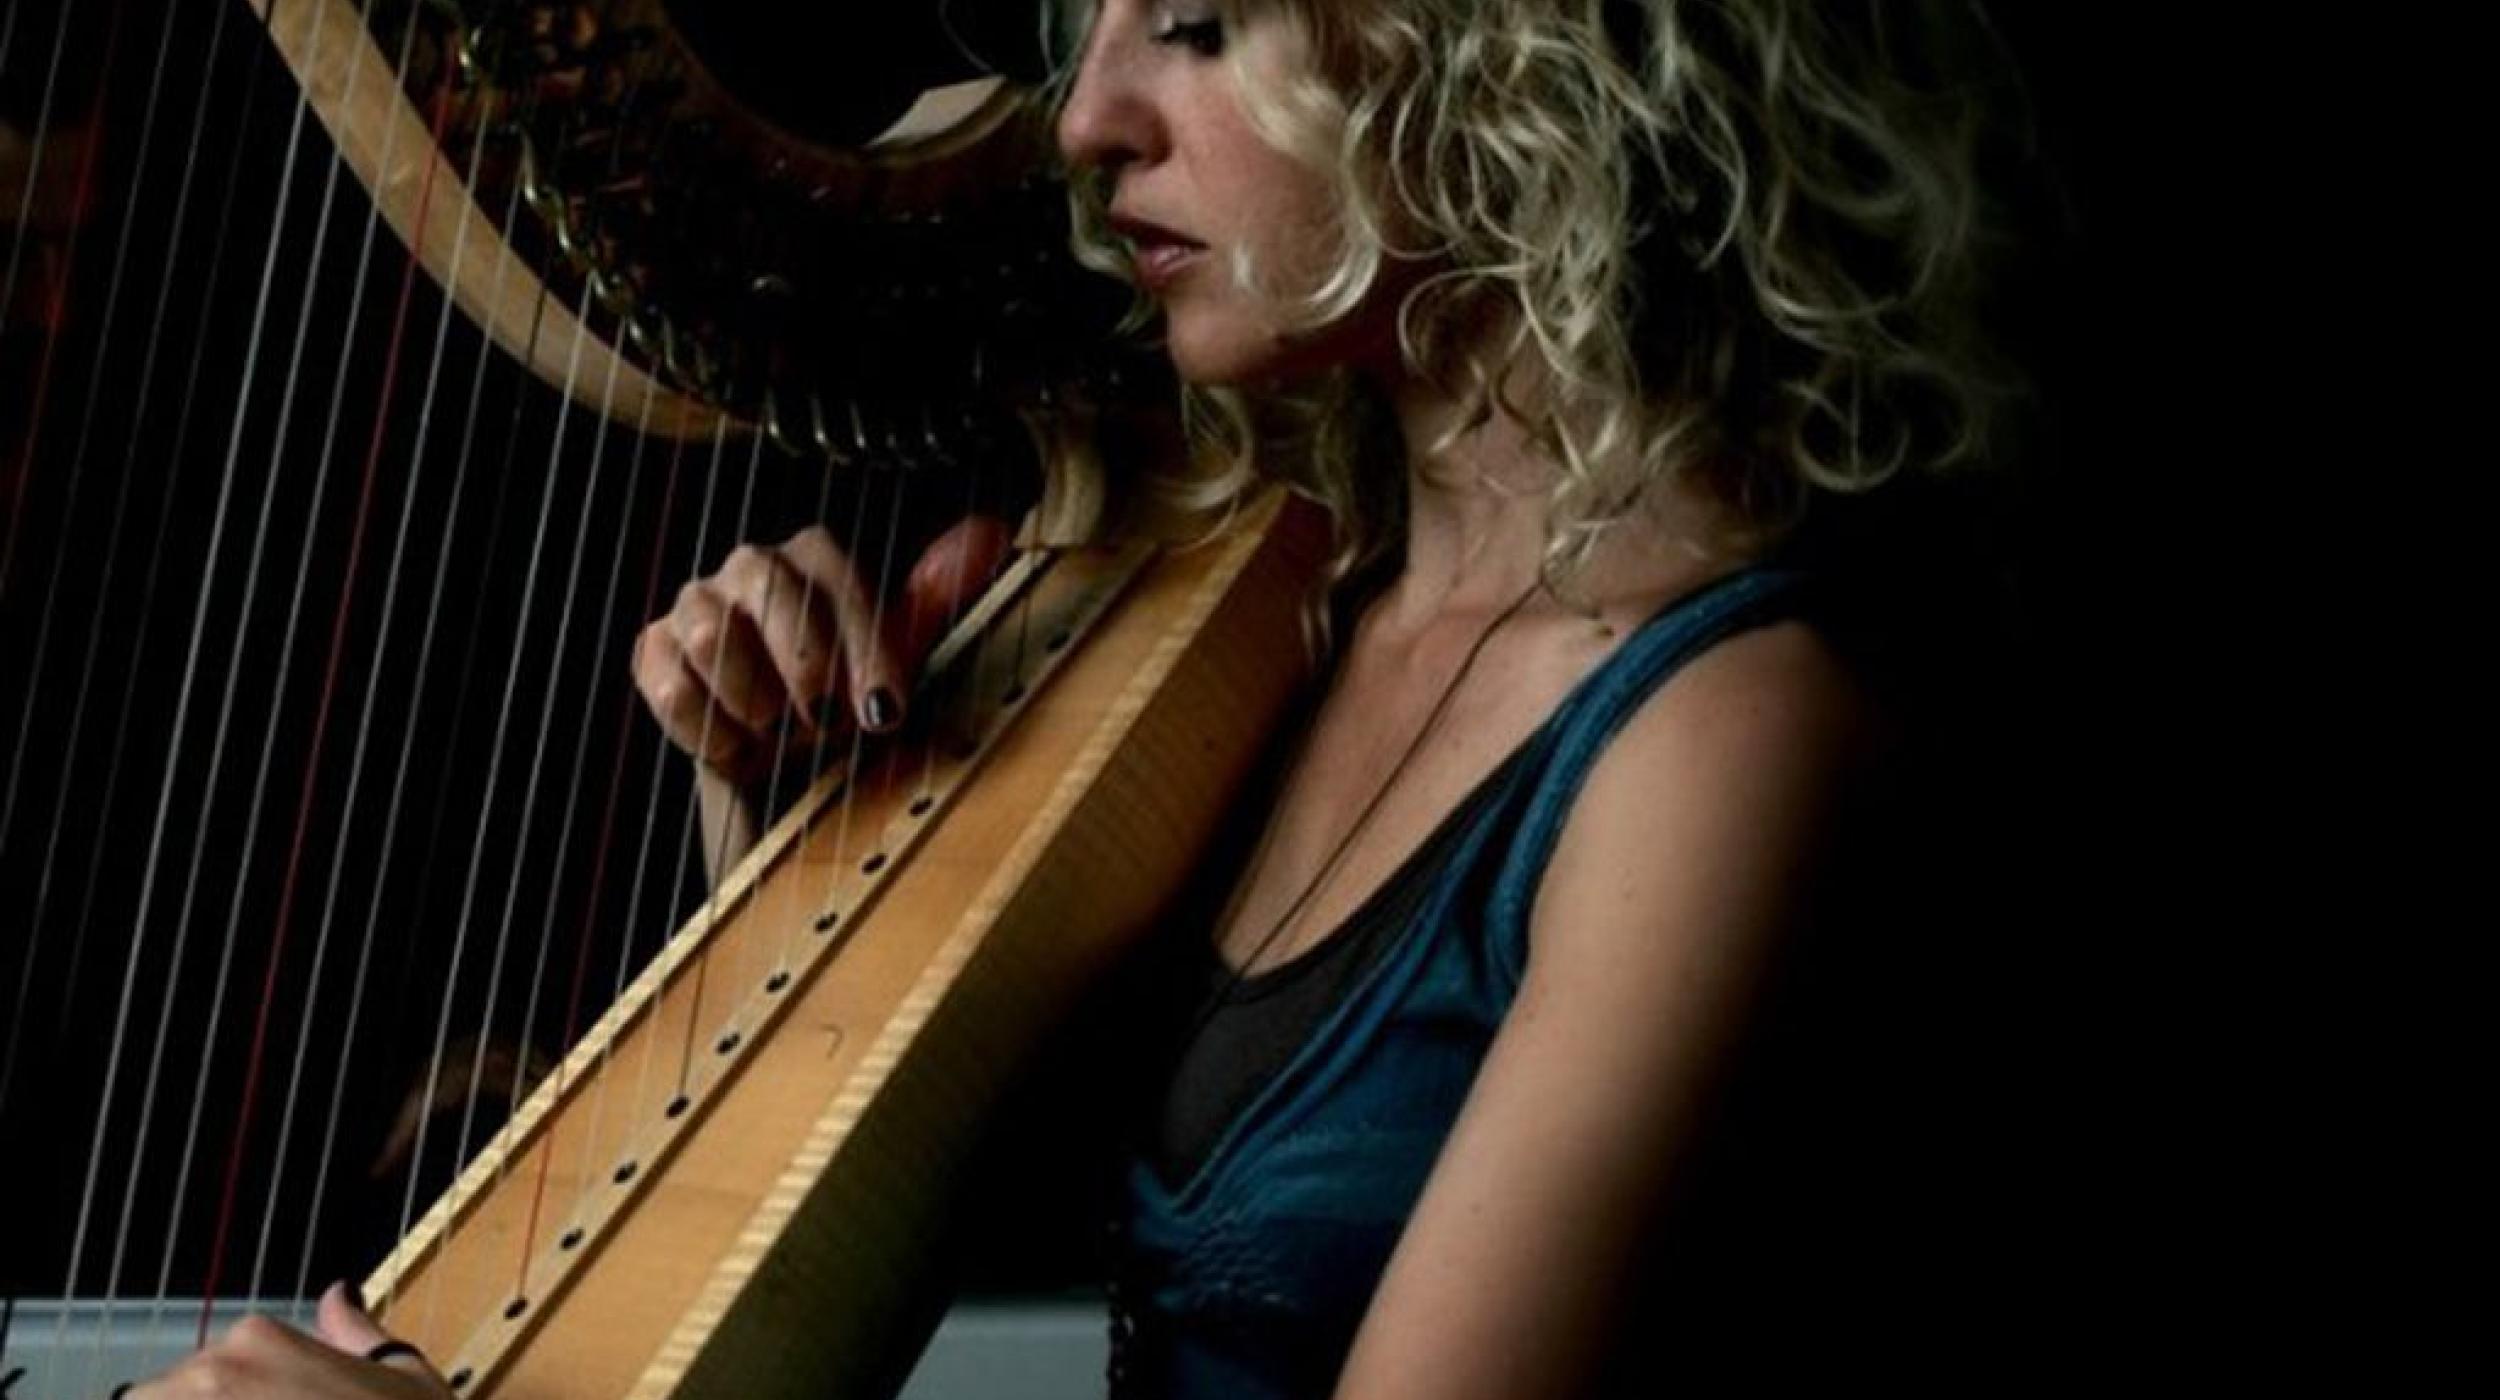 The Girl with Three Harps: Ruth Wall